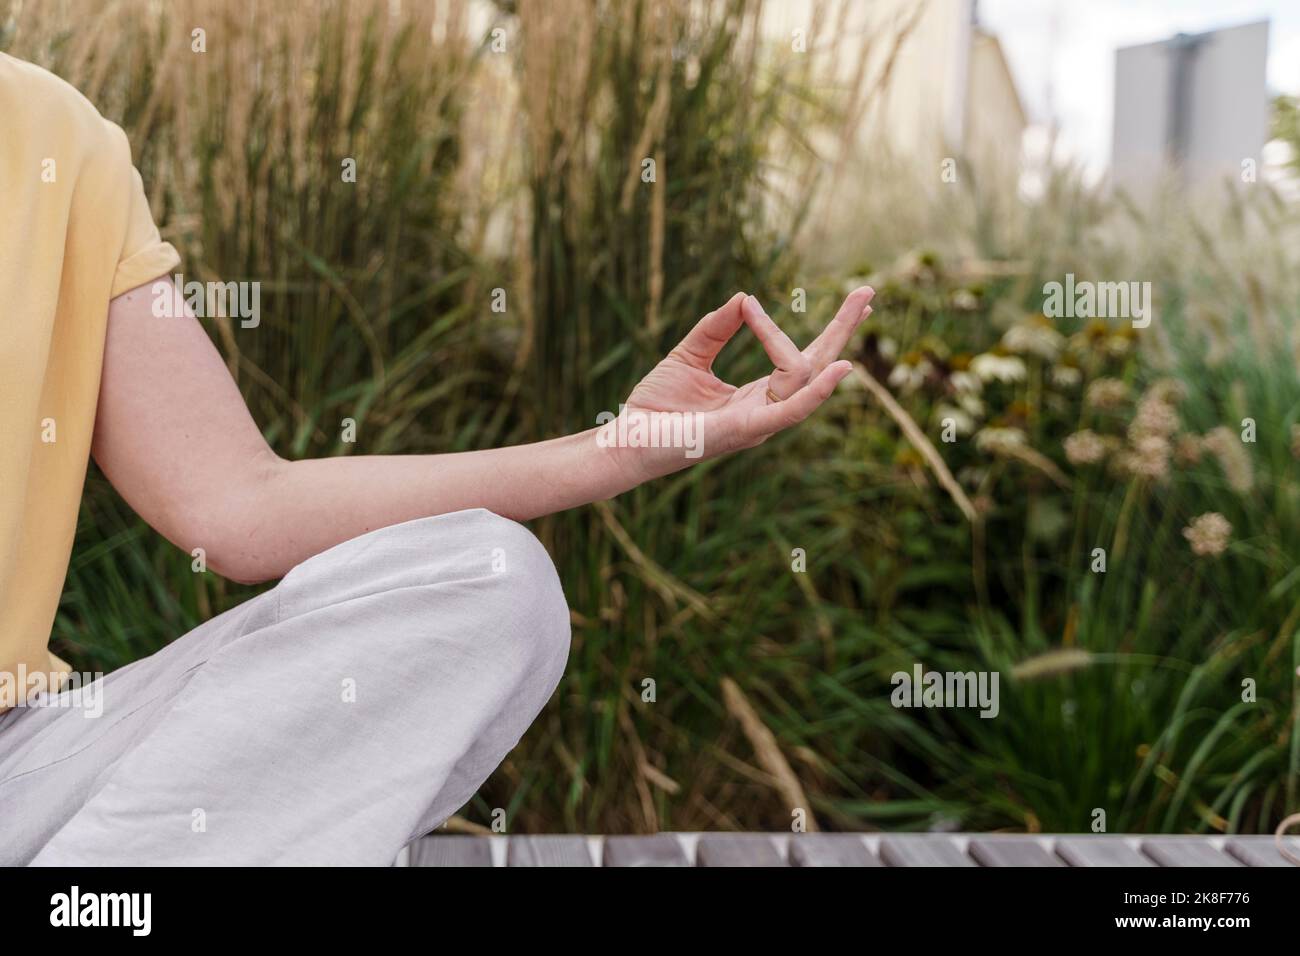 Hand of woman with mudra position Stock Photo